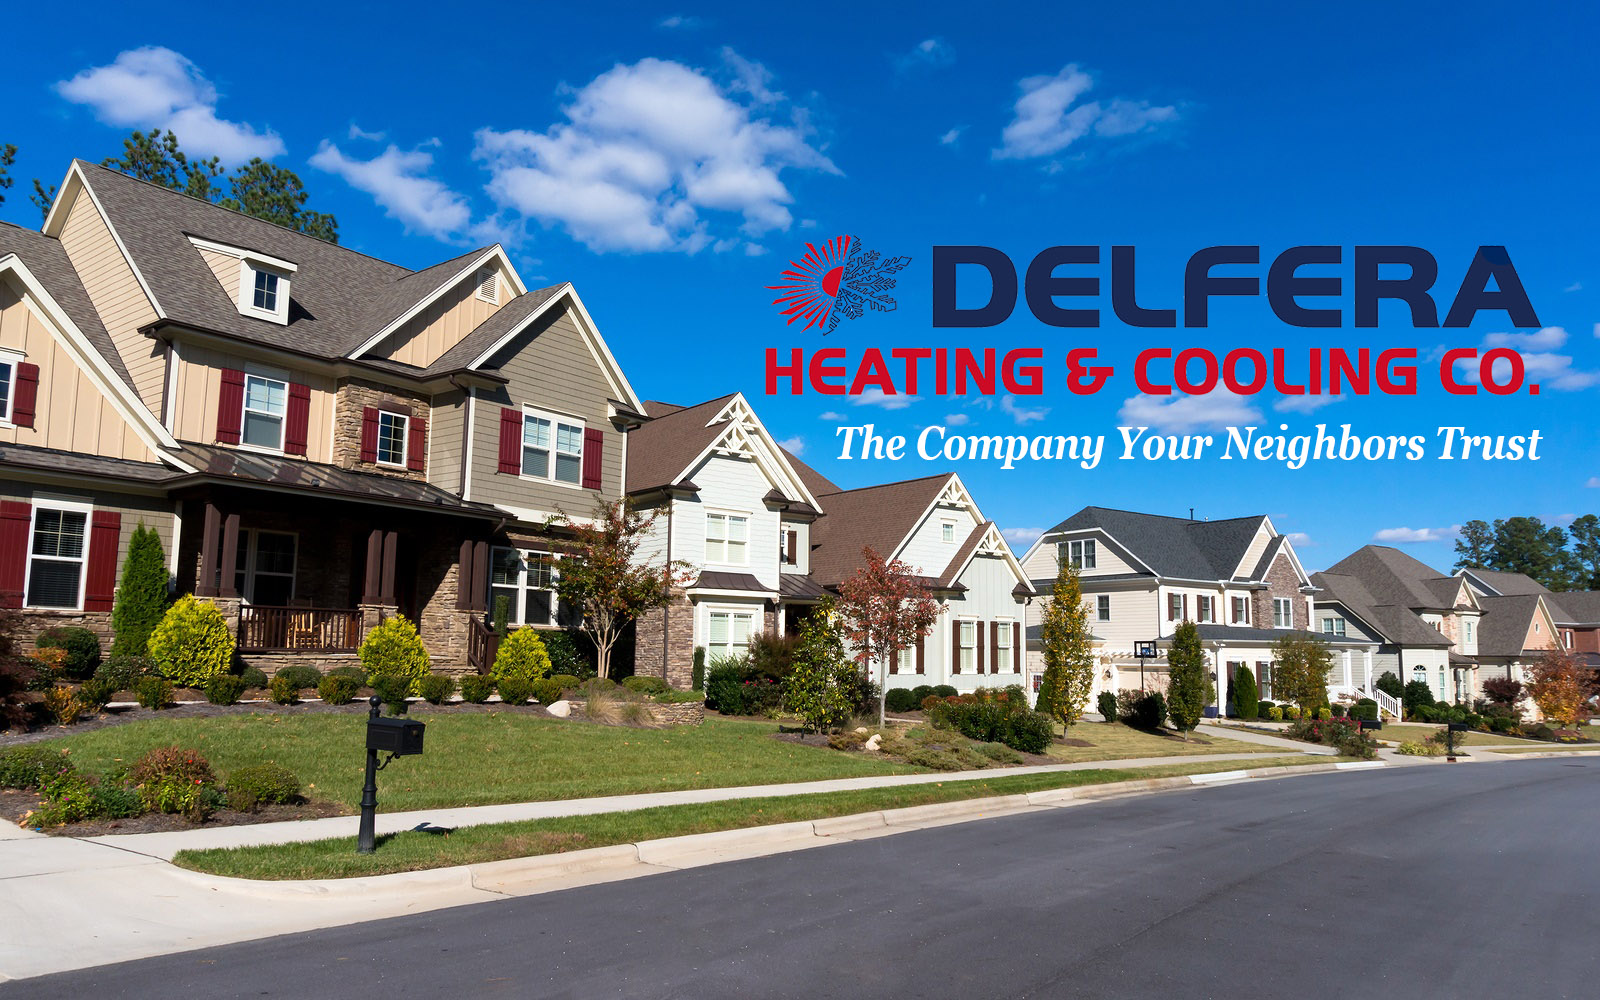 Delfera Heating & Cooling, Co